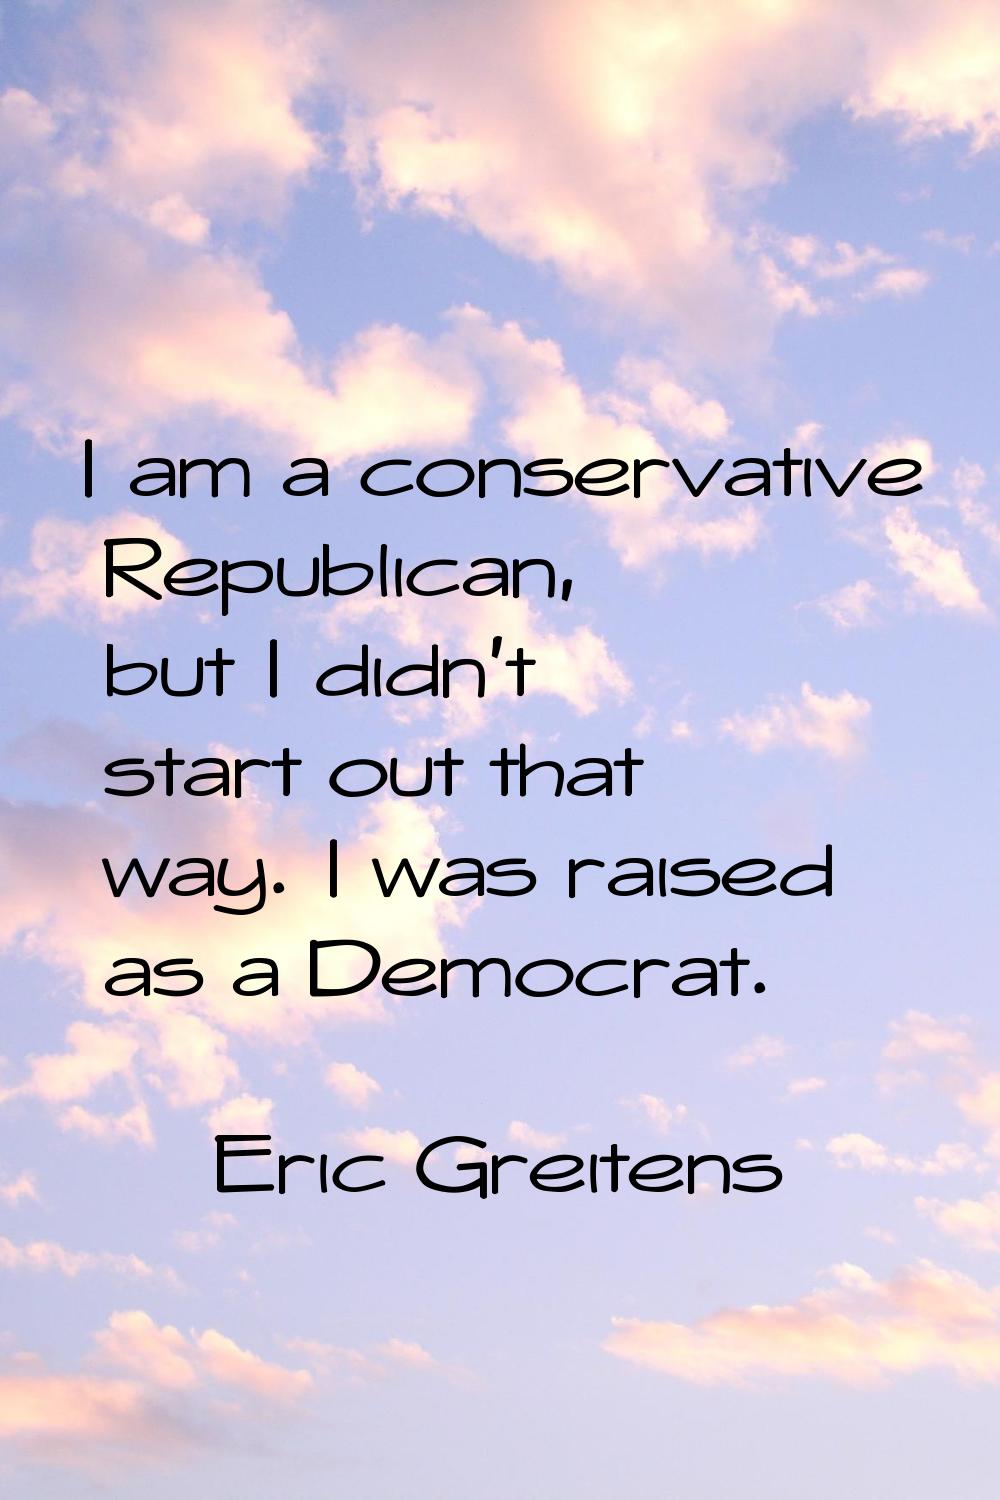 I am a conservative Republican, but I didn't start out that way. I was raised as a Democrat.